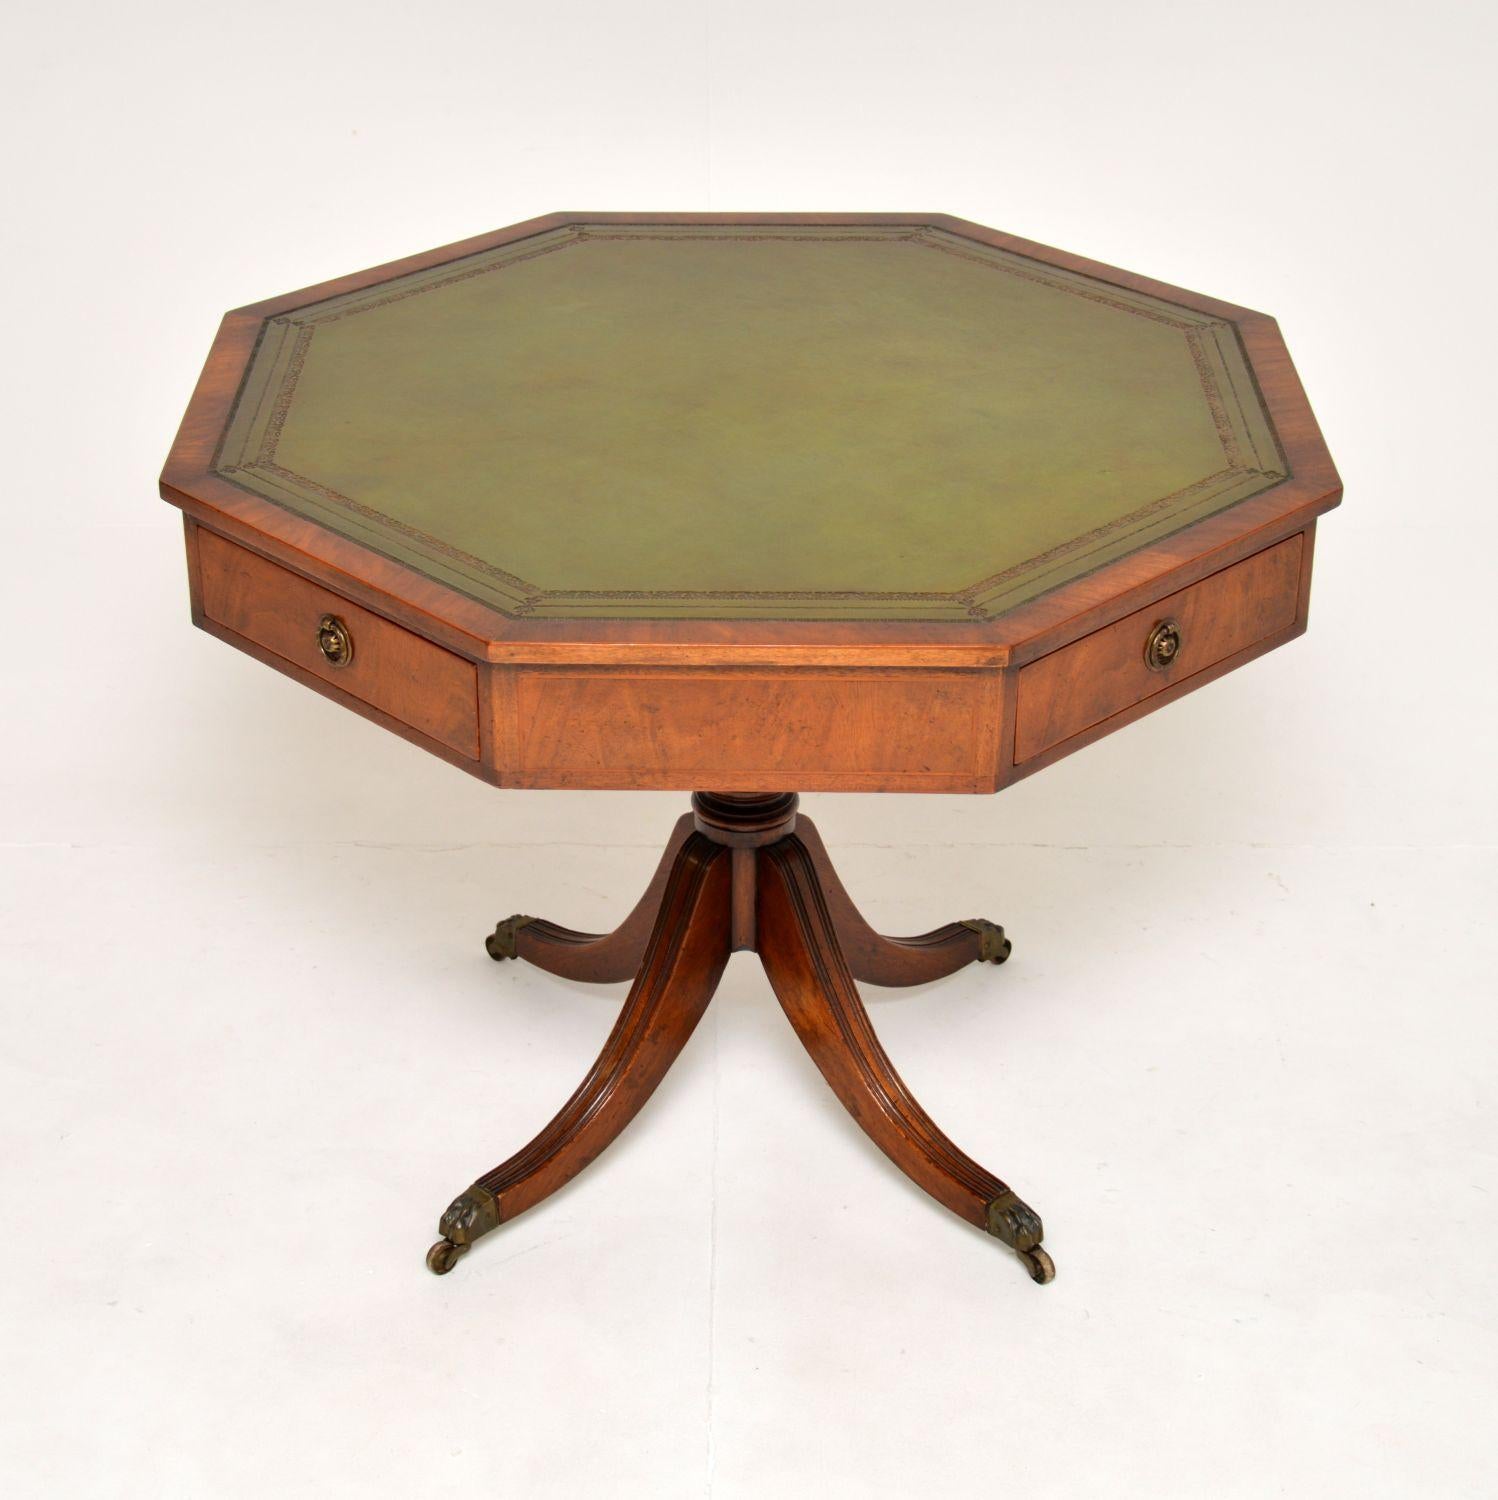 A fantastic antique leather top drum table. This was made in England, it is in the Regency style and dates from around the 1900-1920 period.

It is of fabulous quality and is a very impressive size. The inset leather top has gold tooled edges, this